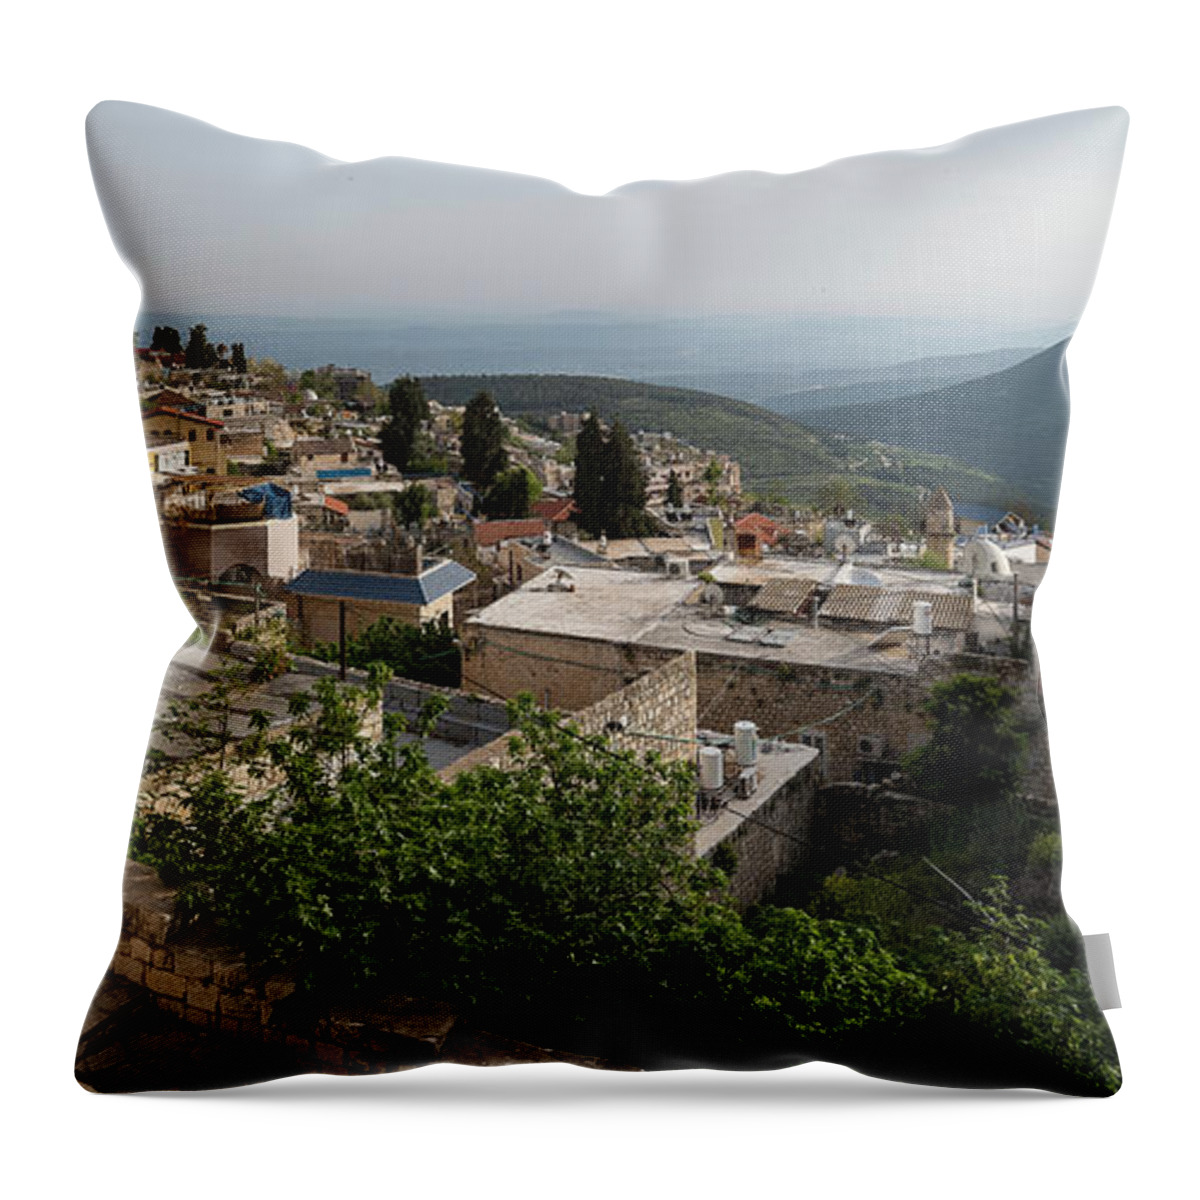 Photography Throw Pillow featuring the photograph View Of Houses In A City, Safed Zfat #1 by Panoramic Images